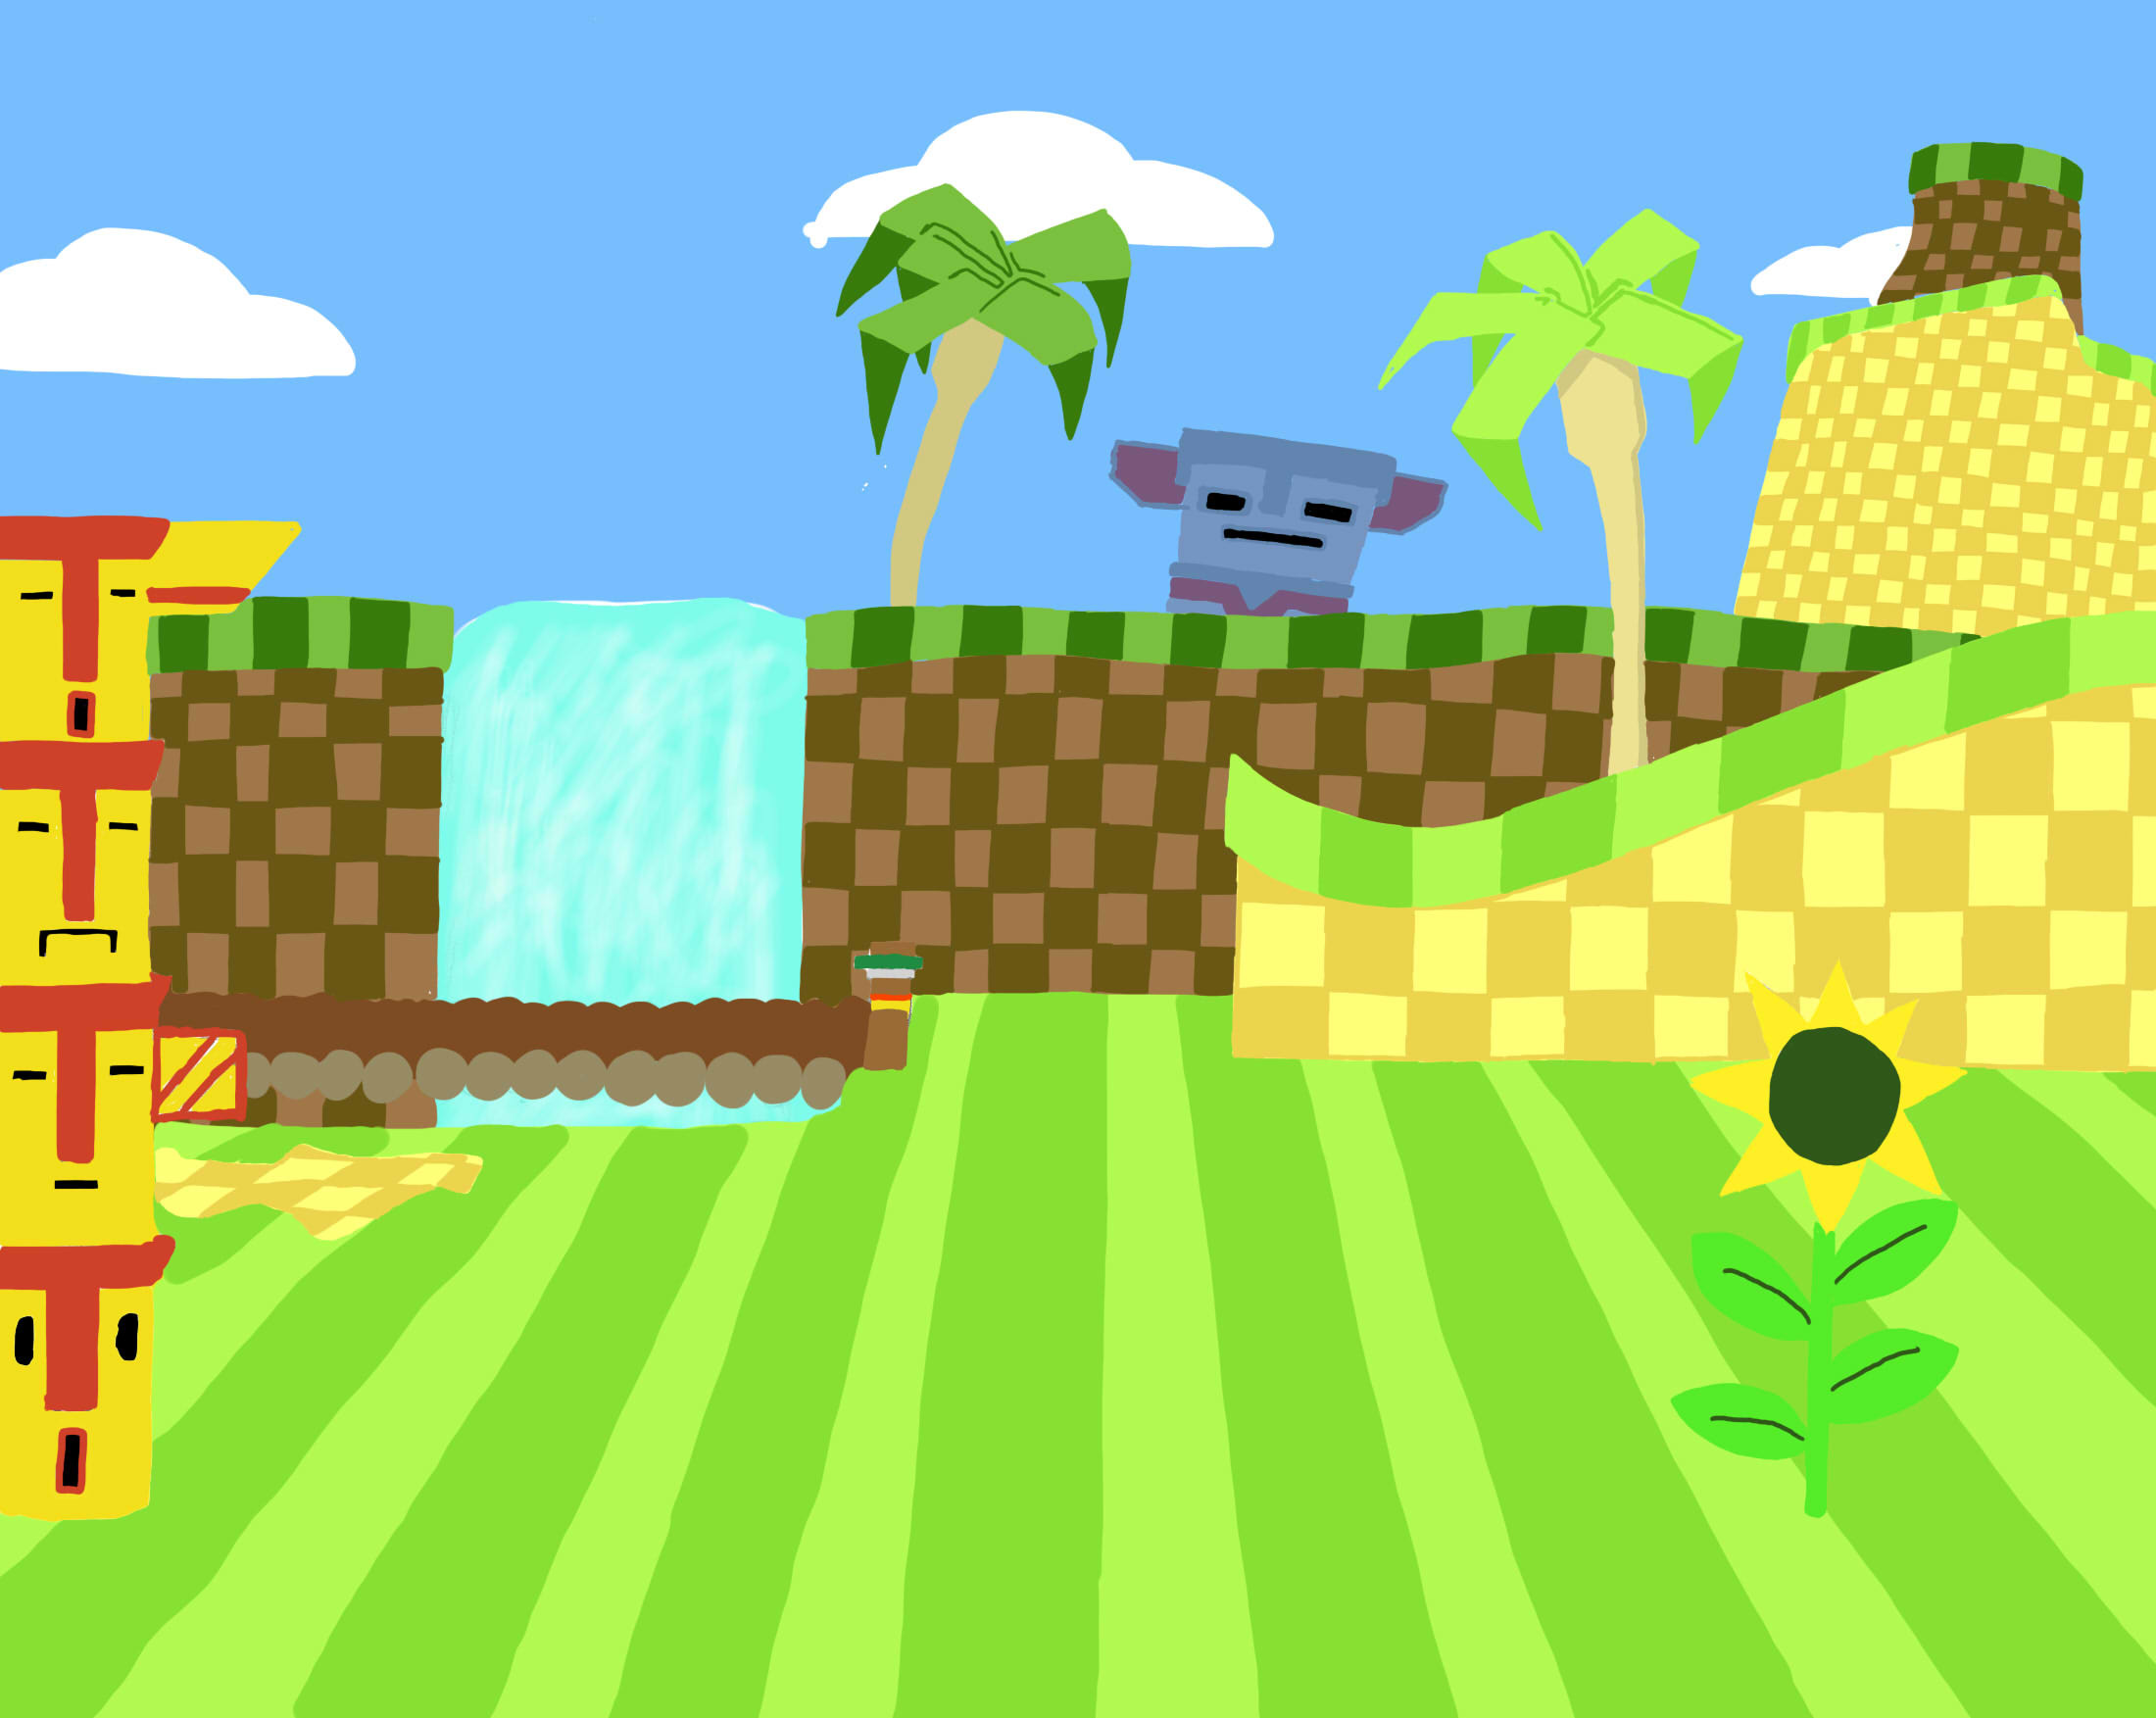 2200x1753 Green Hill Zone Wallpaper Green hill zone background by